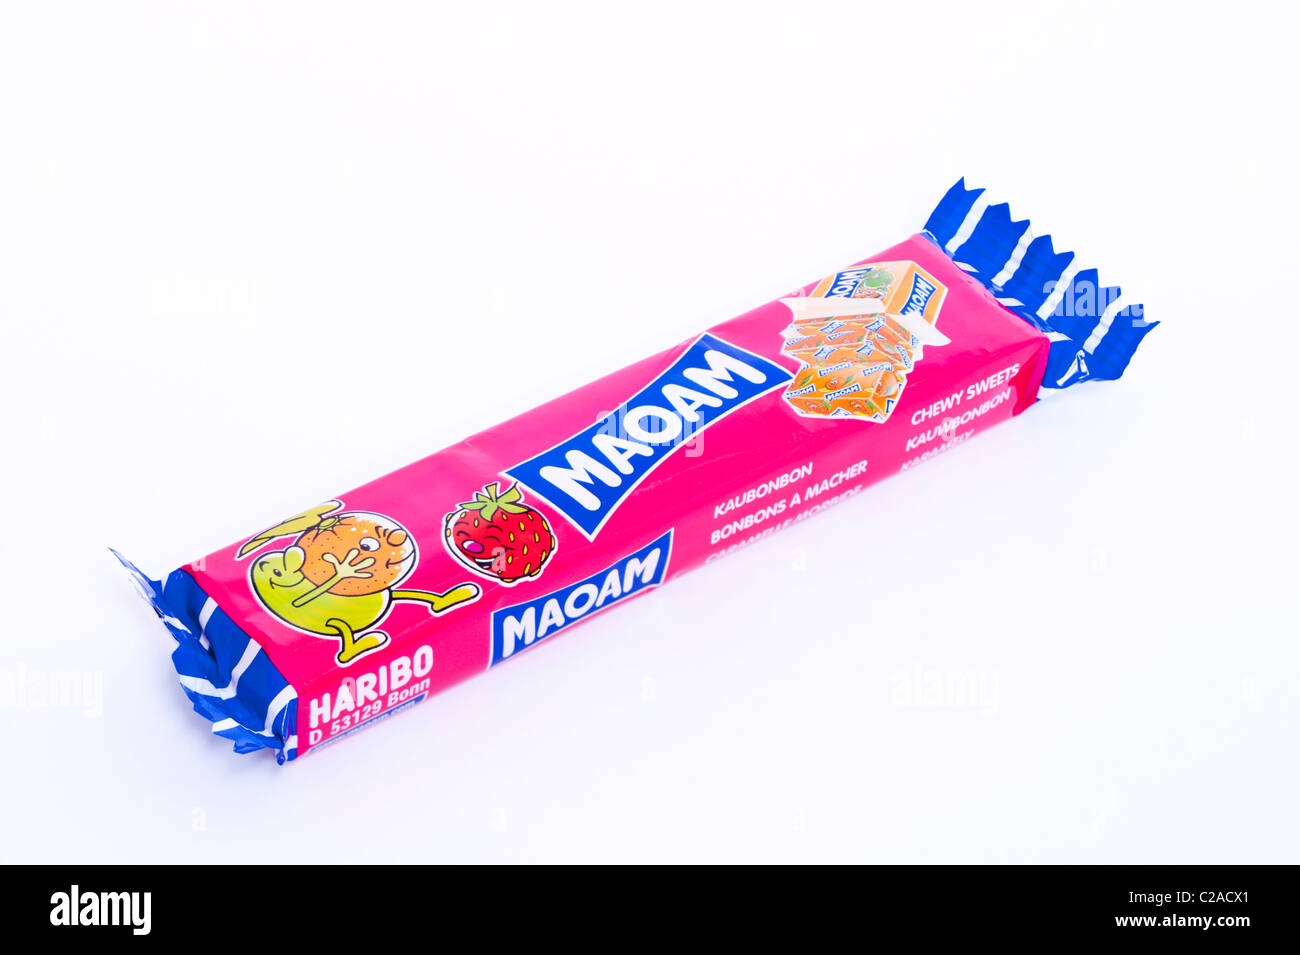 A packet of Maoam Haribo chewy sweets on a white background Stock Photo